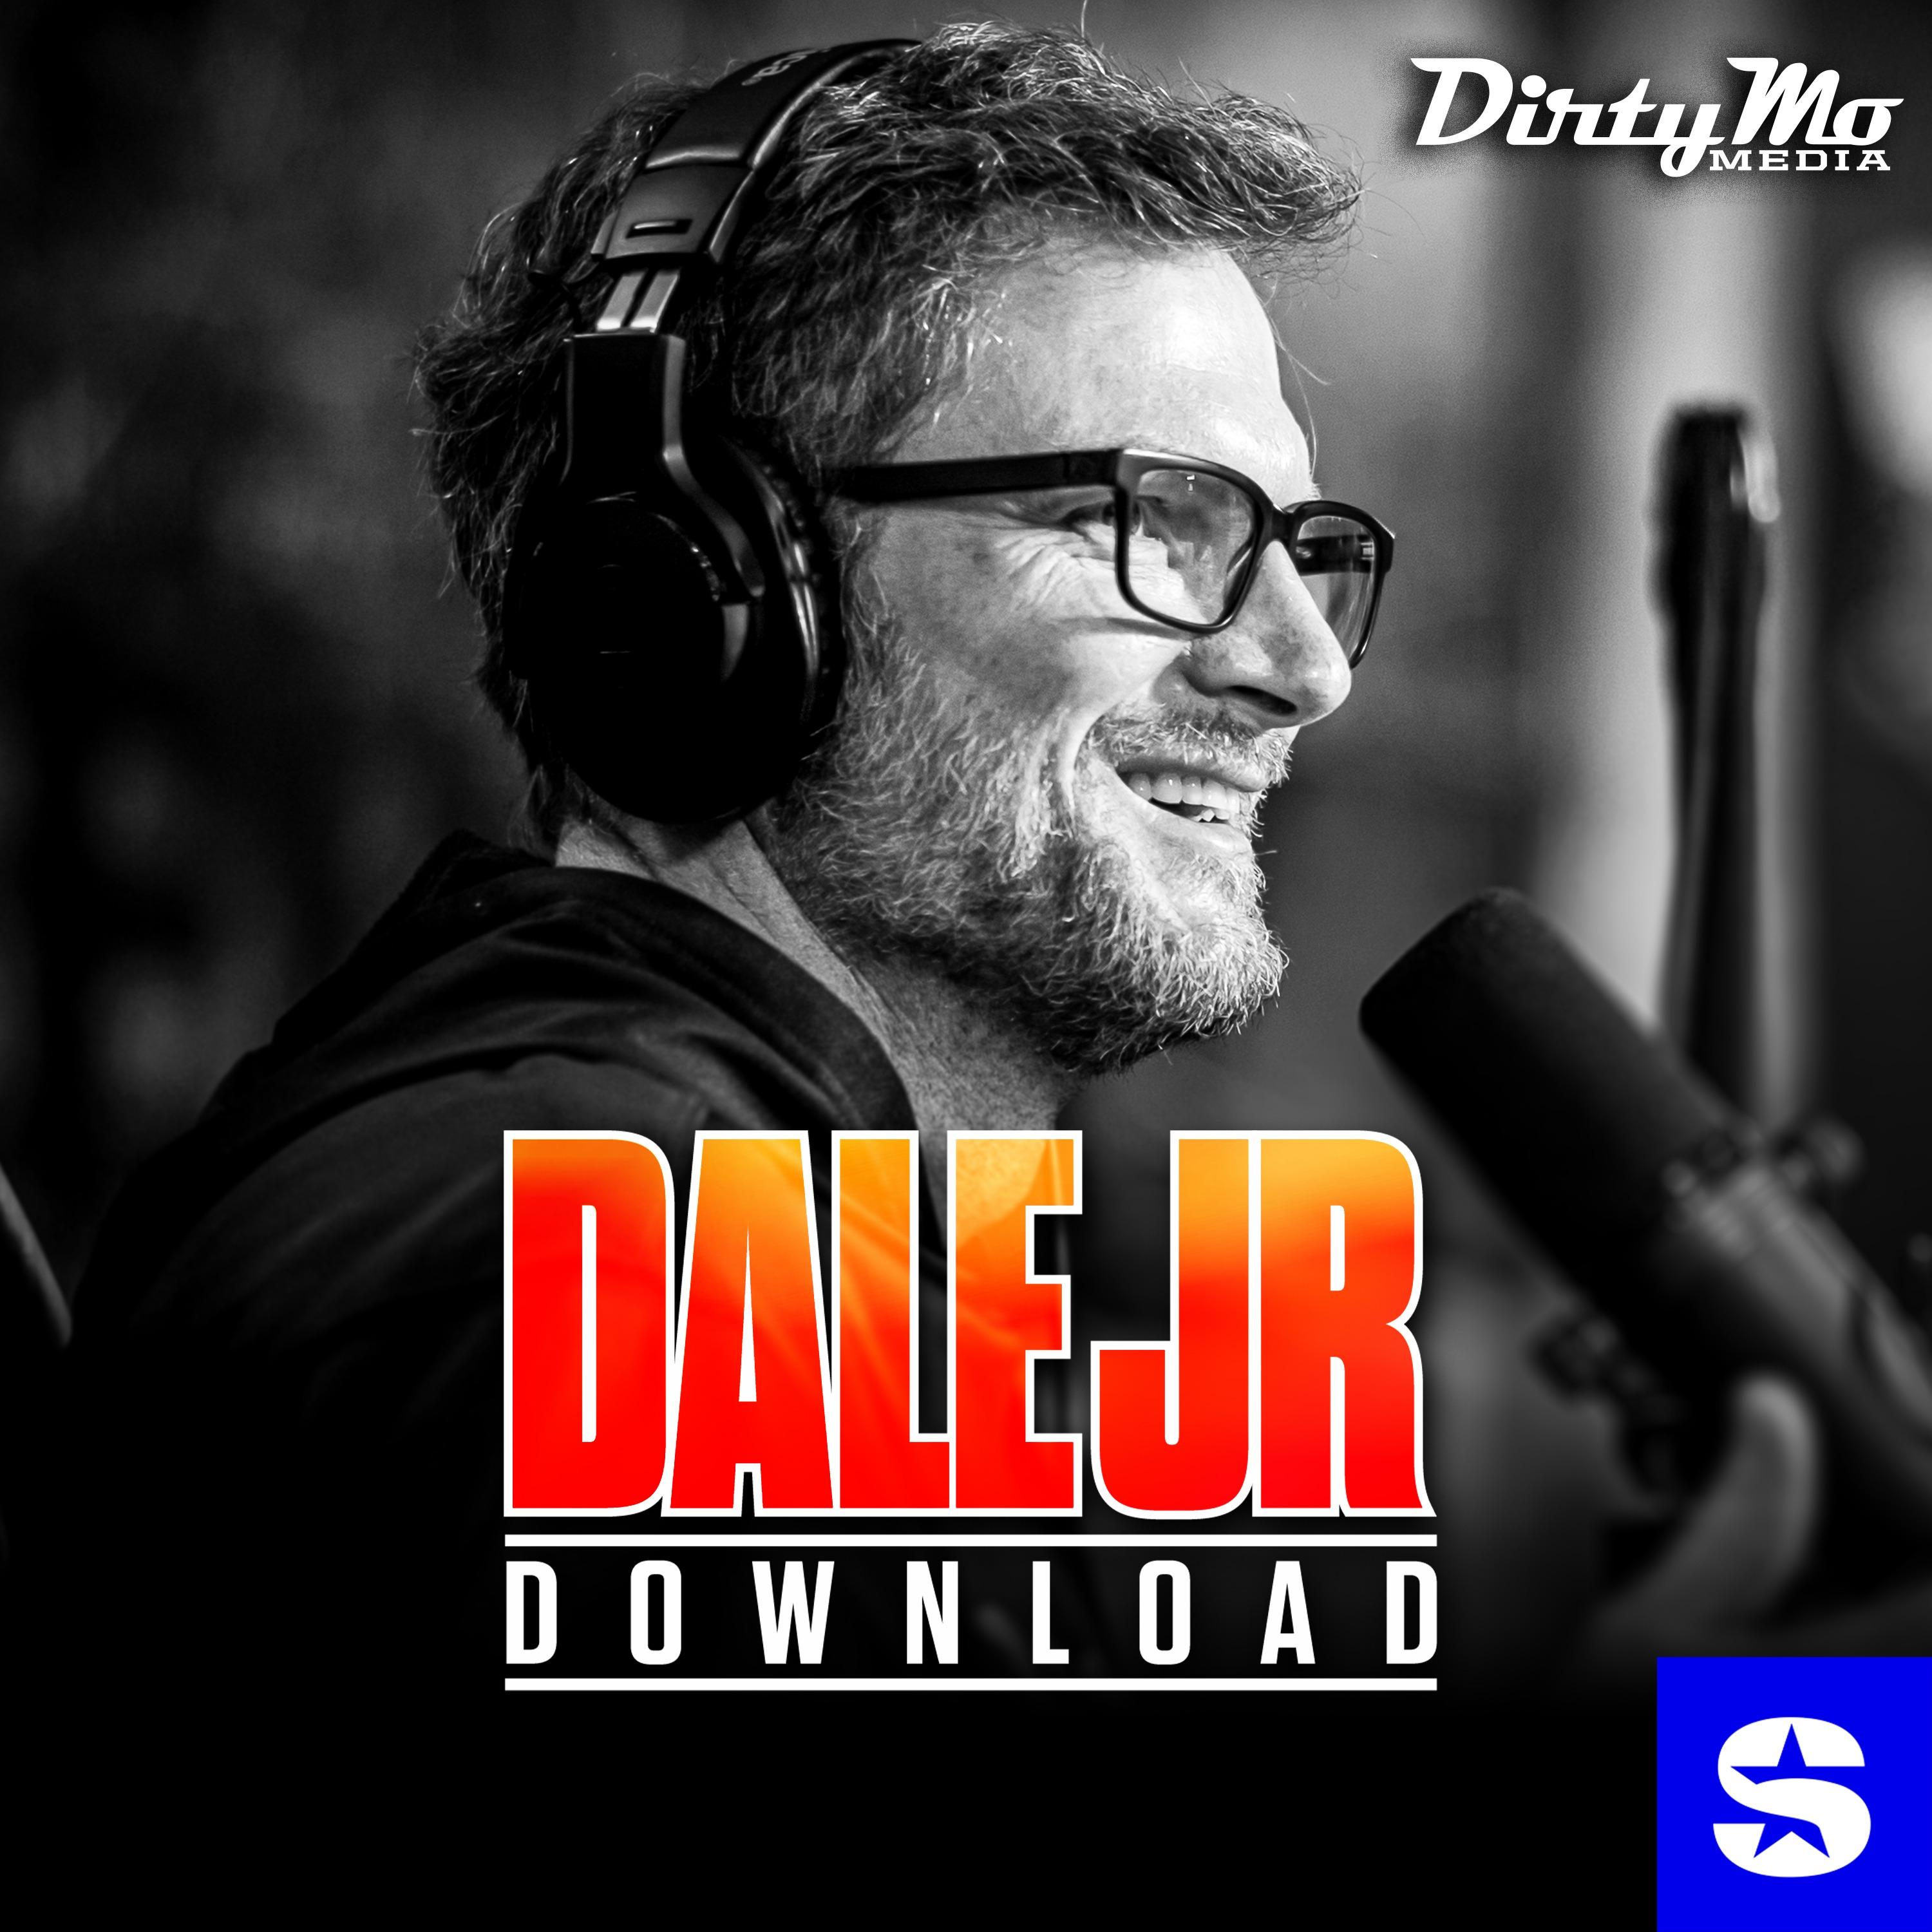 Show poster of The Dale Jr. Download